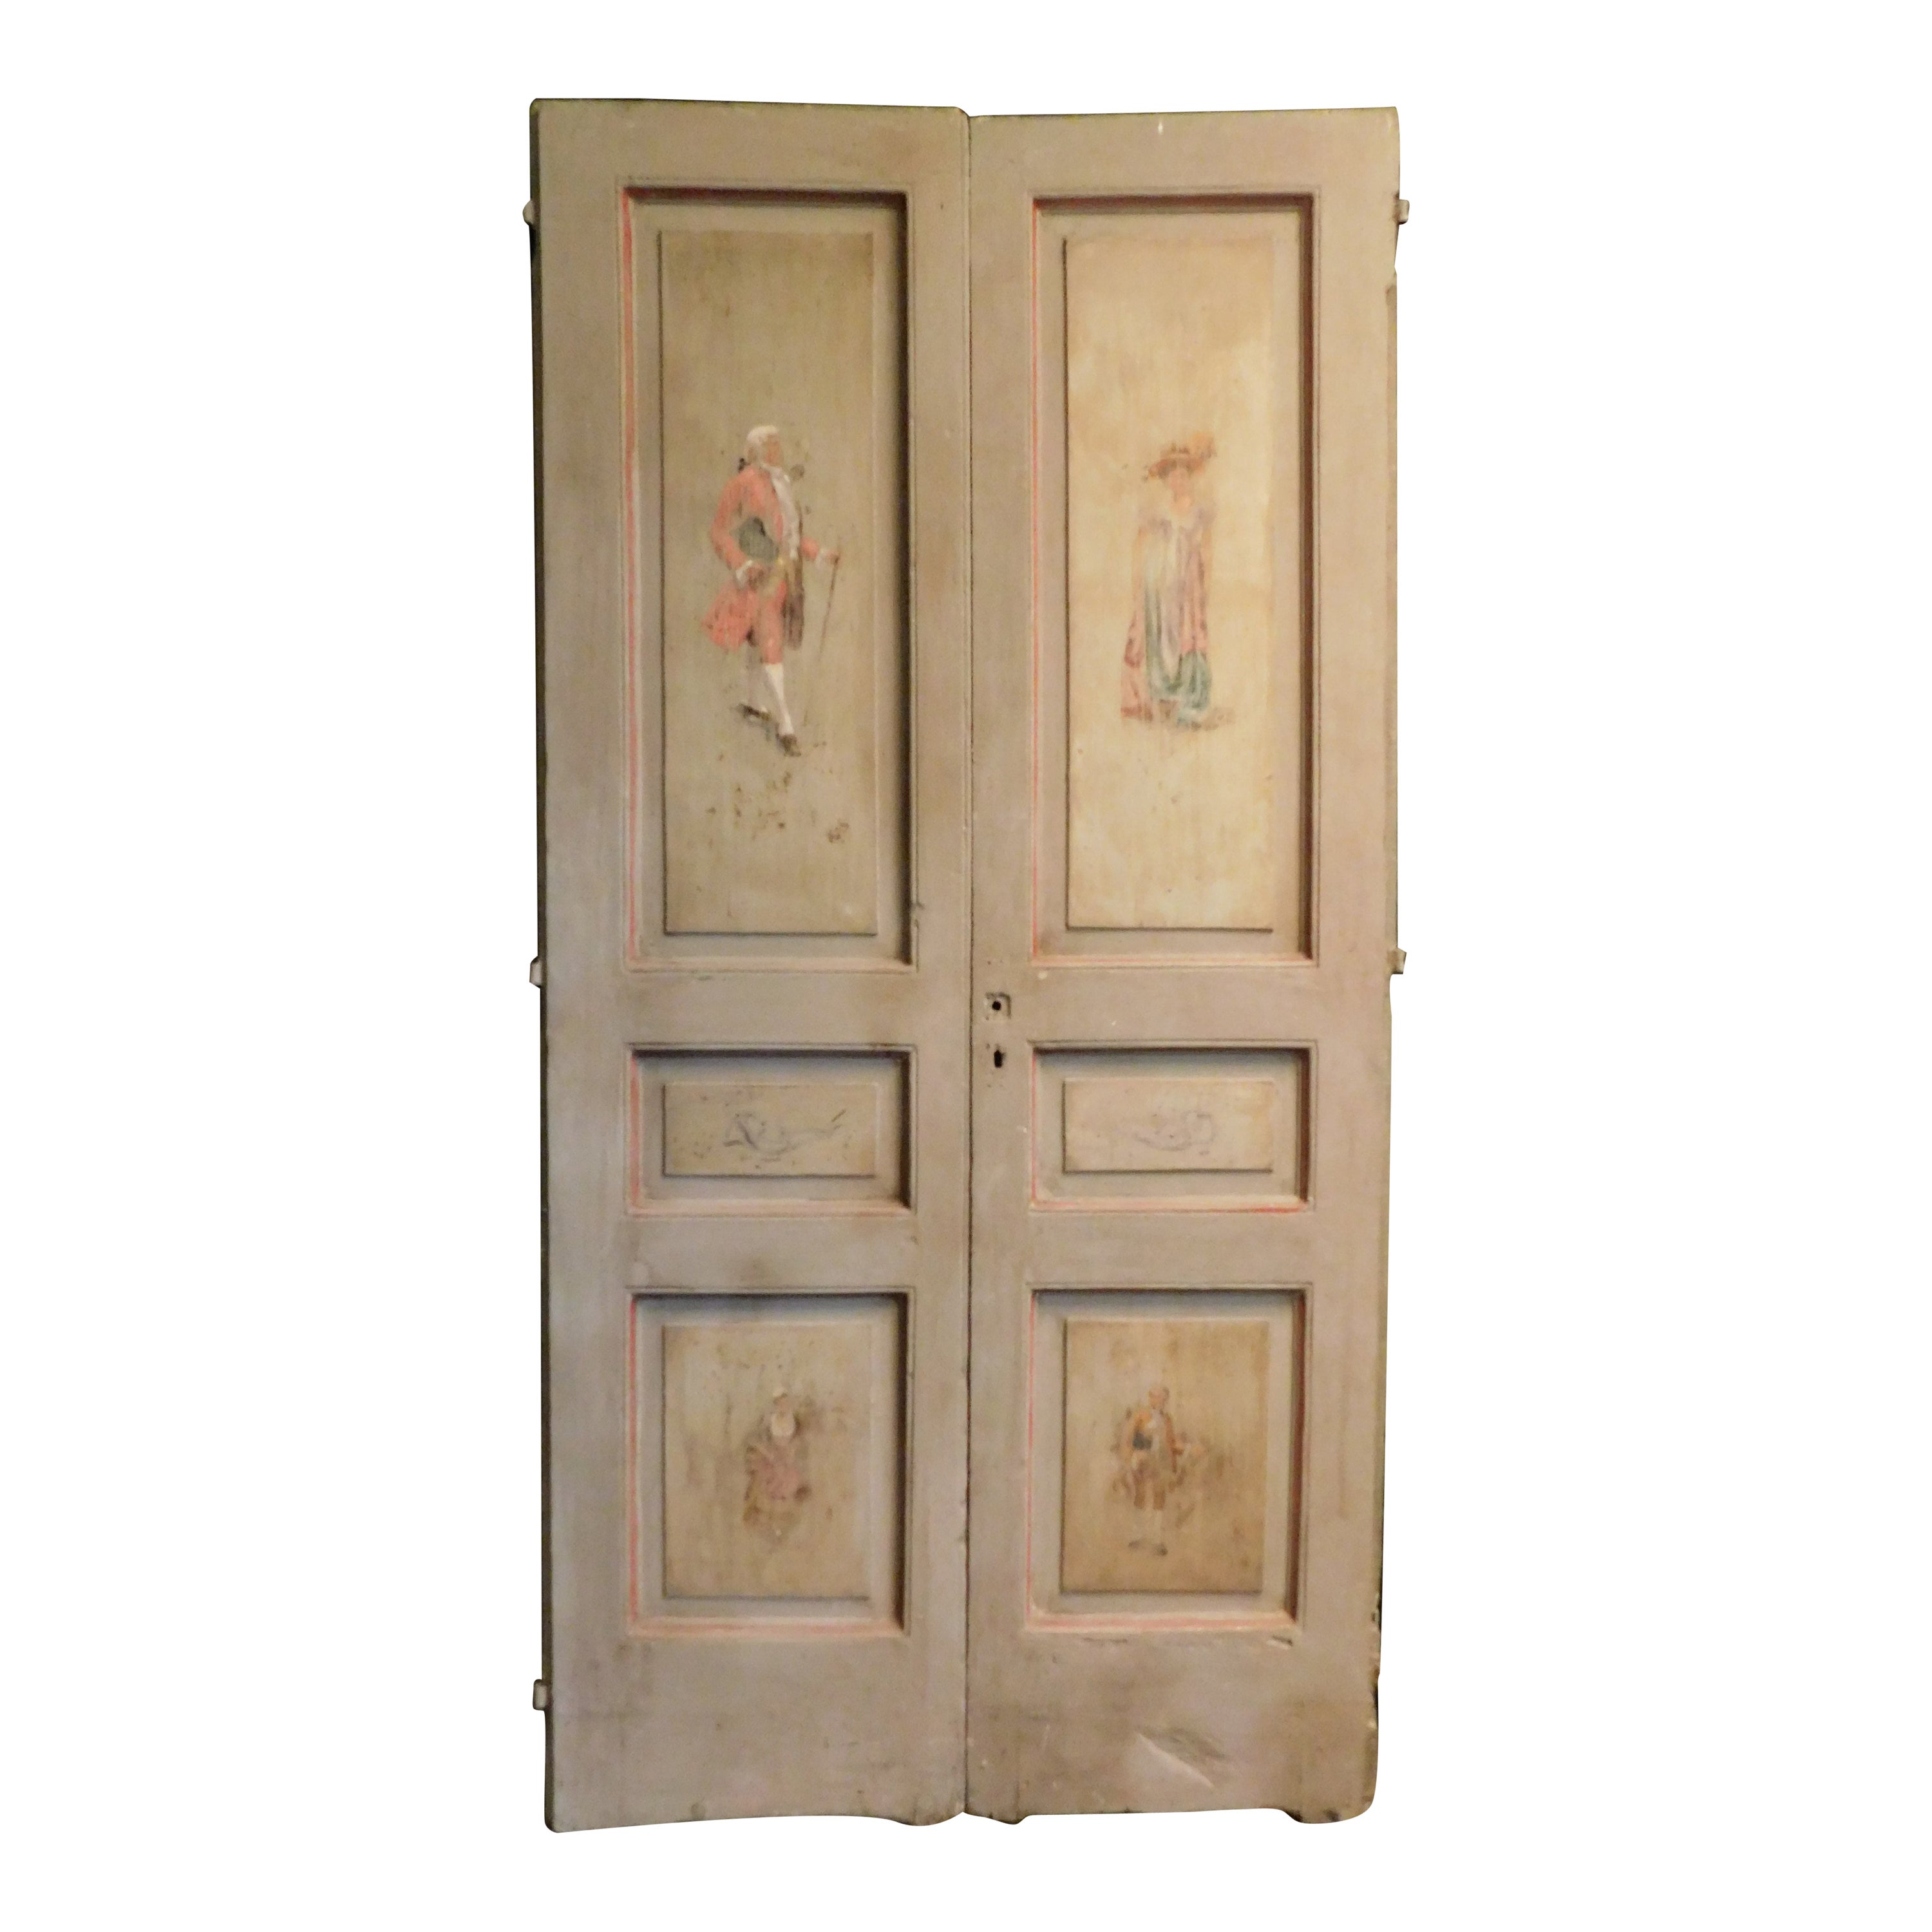 set of 2 lacquered and painted double doors with figures, Italy